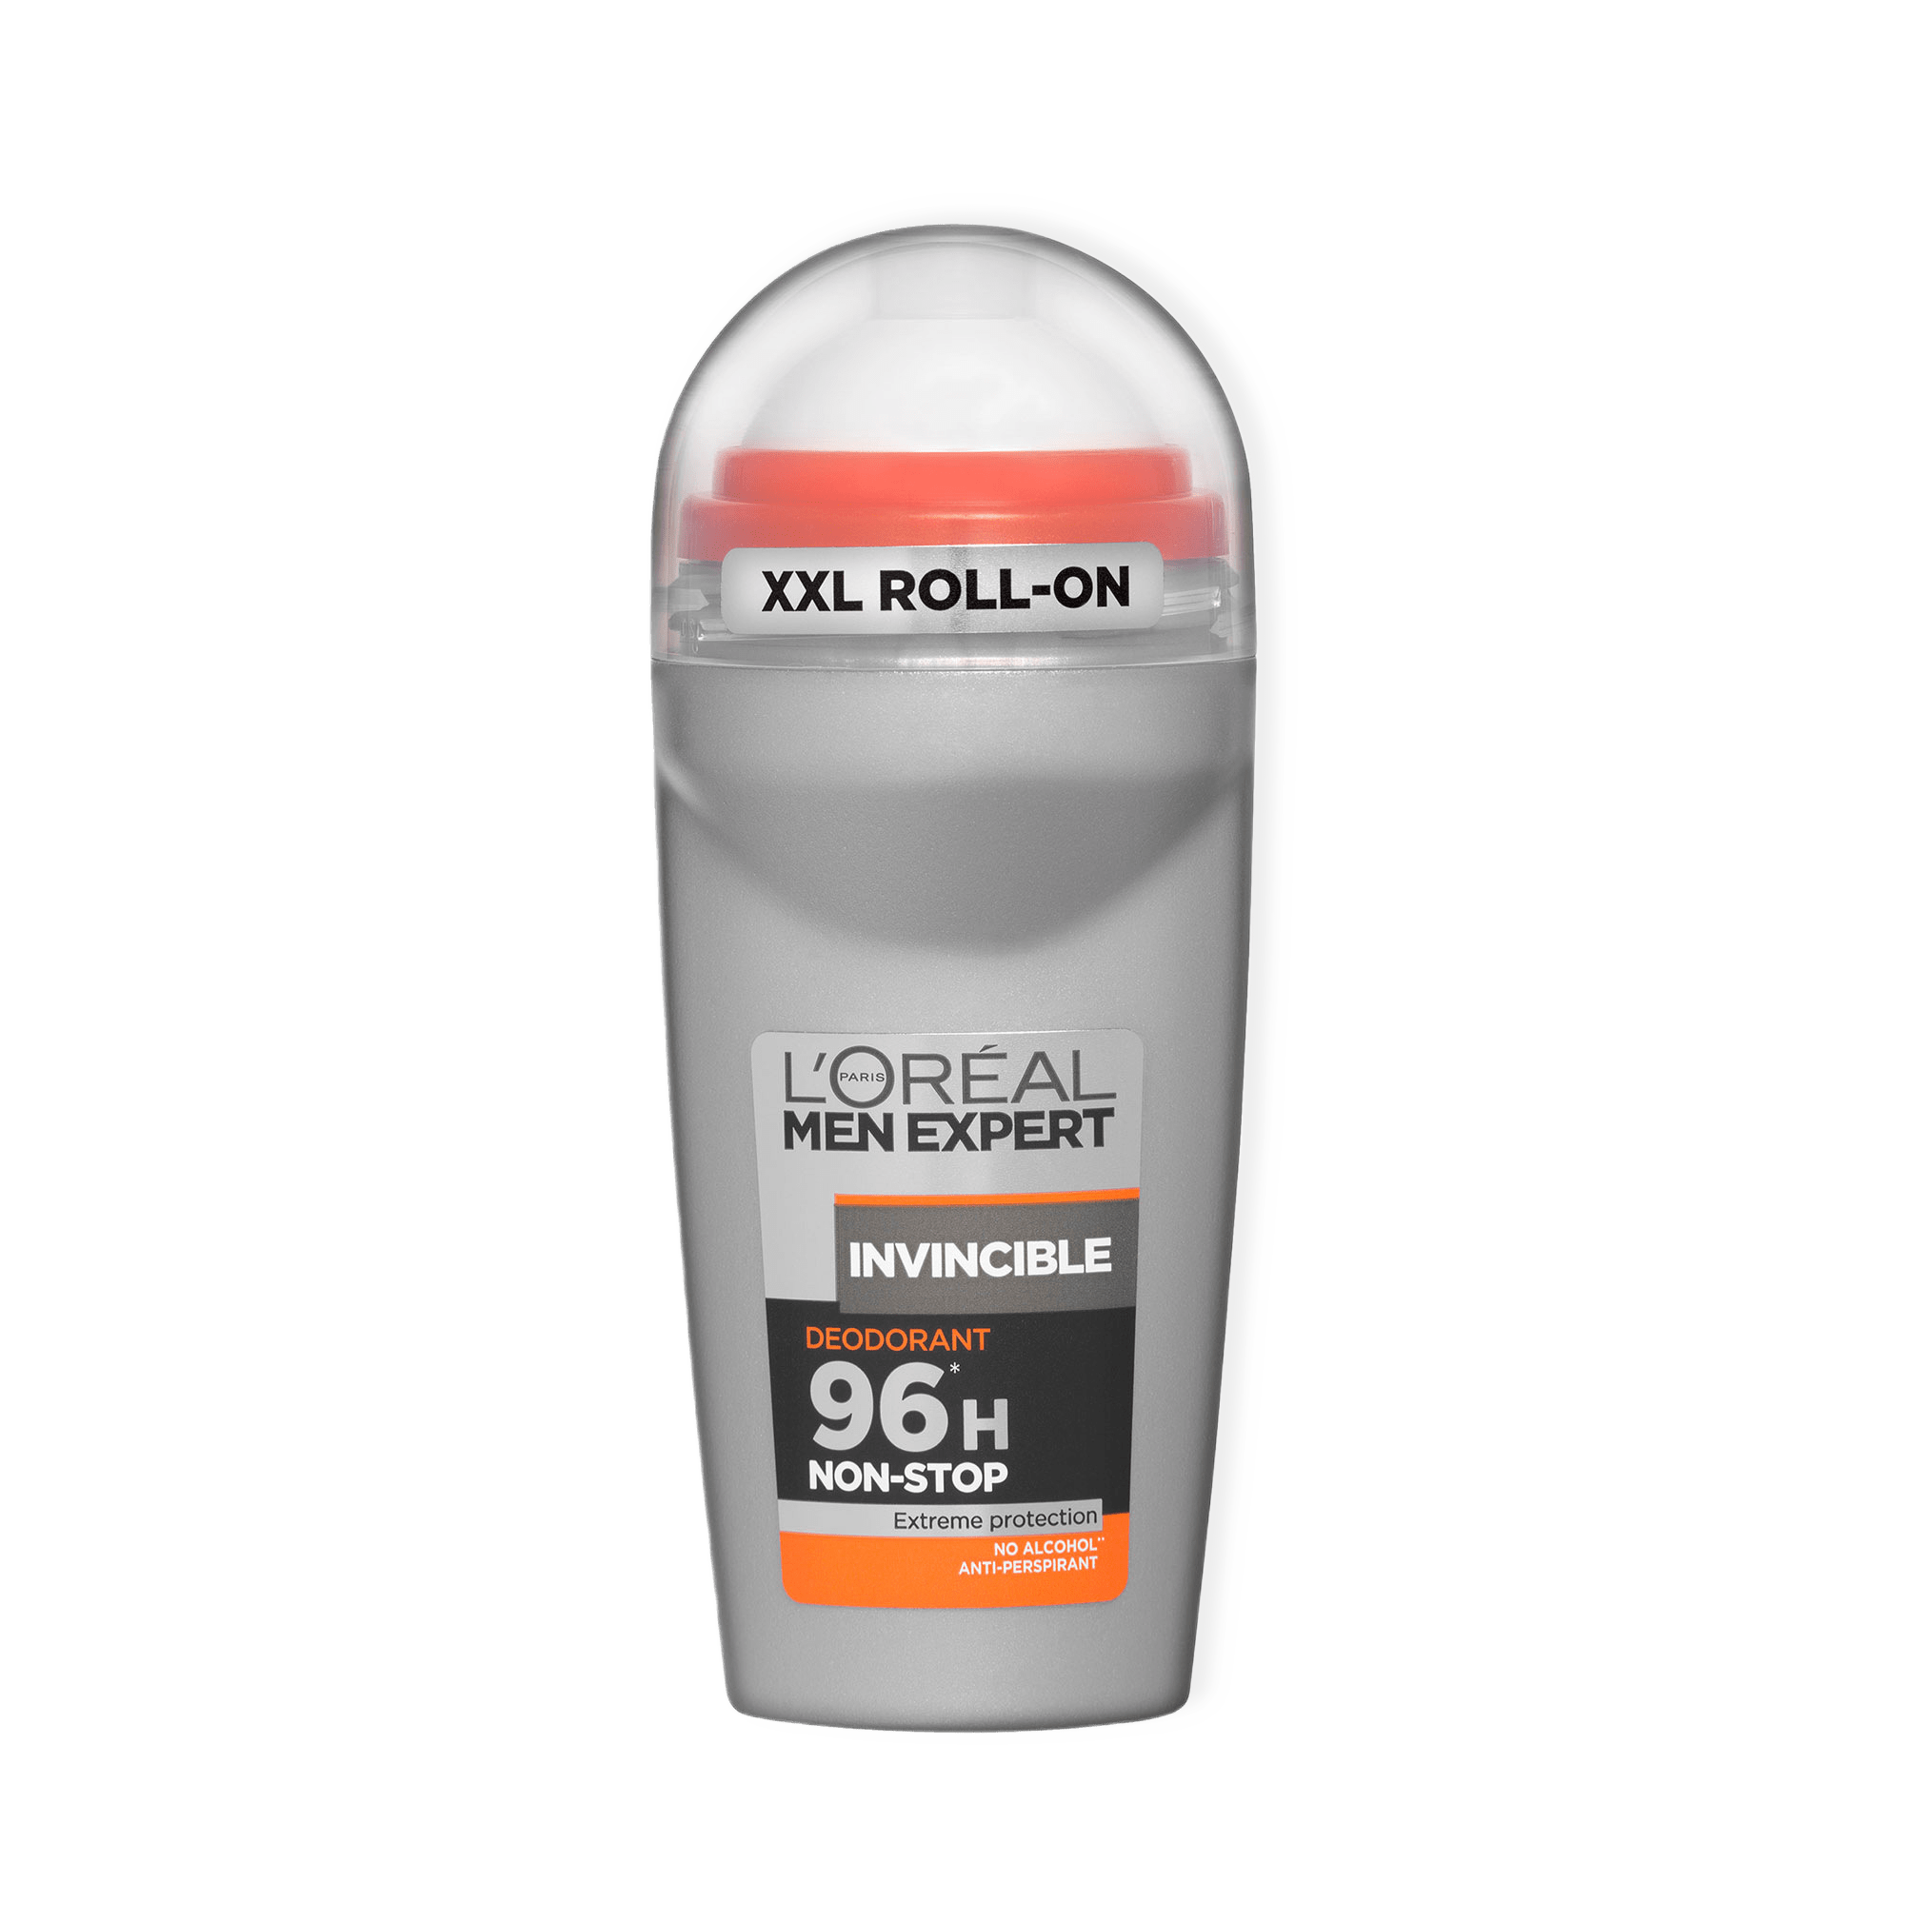 Deo Roll-On Invincible Extreme Protection 96H, 50 ml från L'Oréal Paris